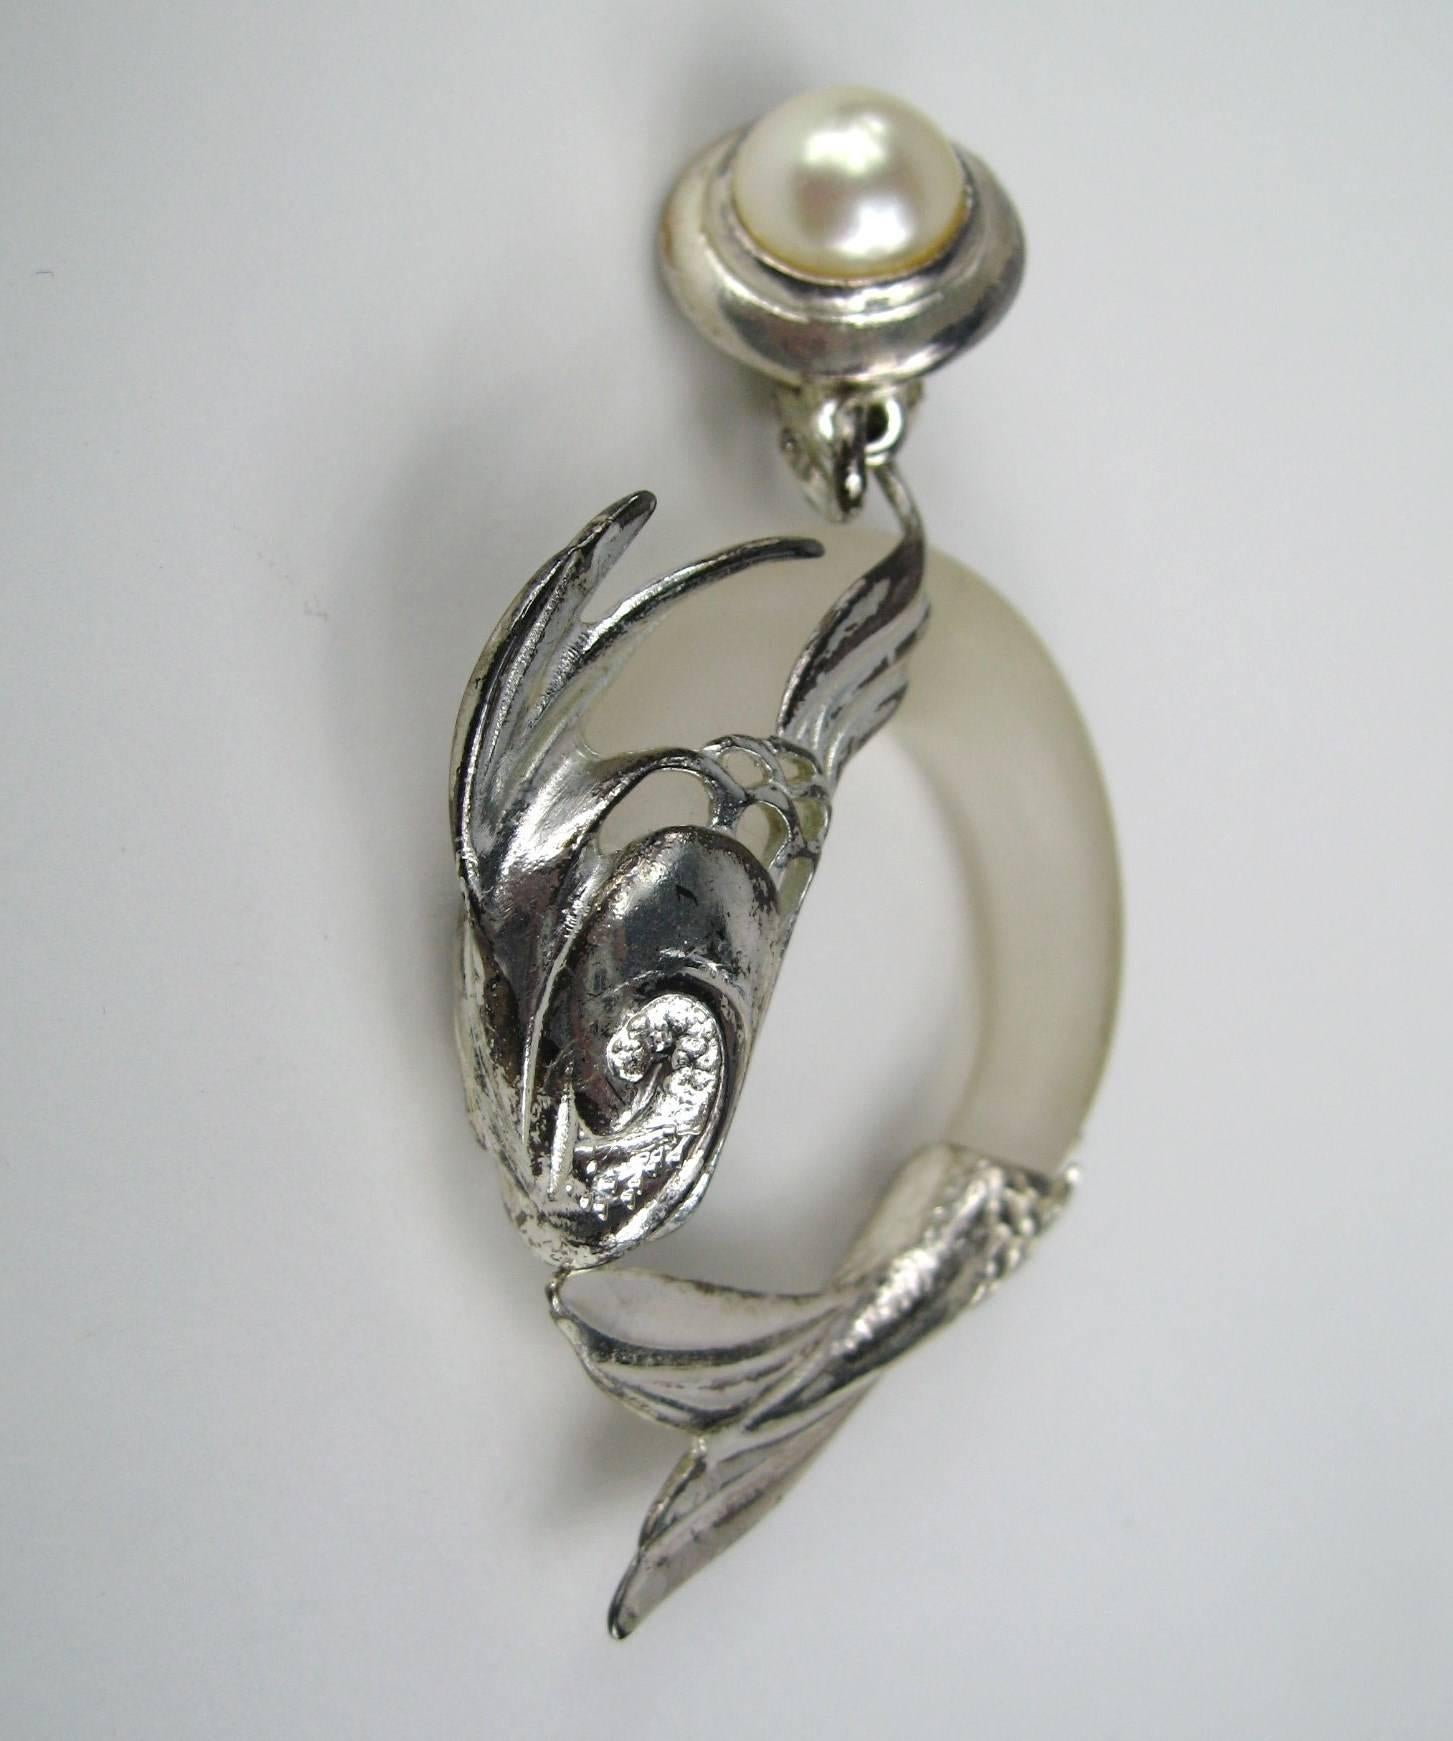  Inna Cytrine Lucite Silver fish Dangle Earrings New, Never Worn -1980s In Excellent Condition For Sale In Wallkill, NY